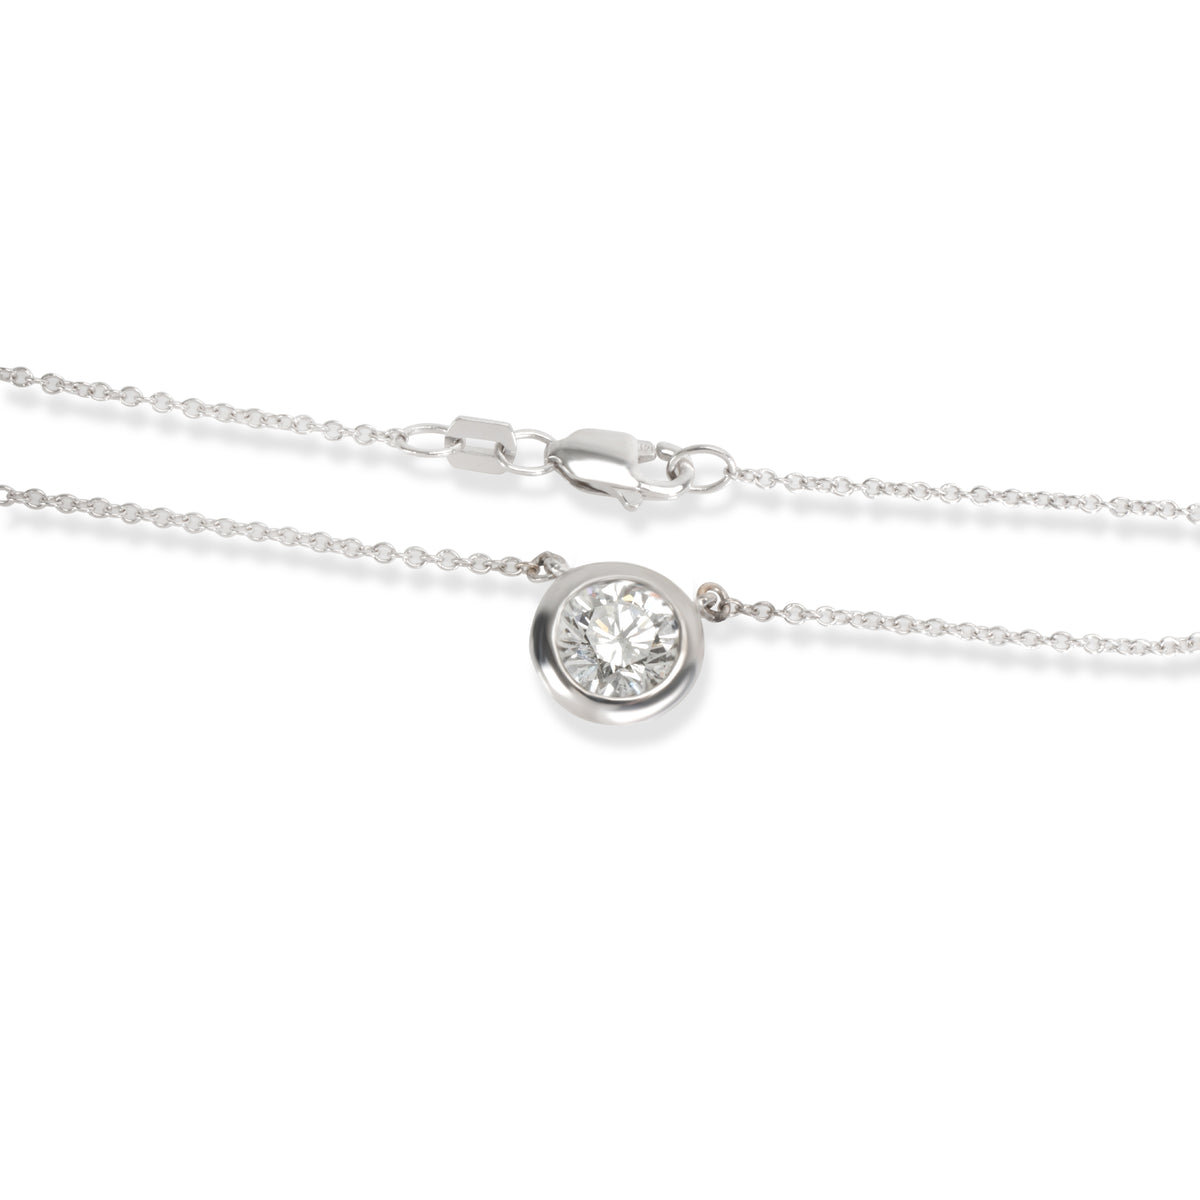 Diamond Bezel Set Solitaire Necklace in 14K White Gold H I2 (1.07 ct)